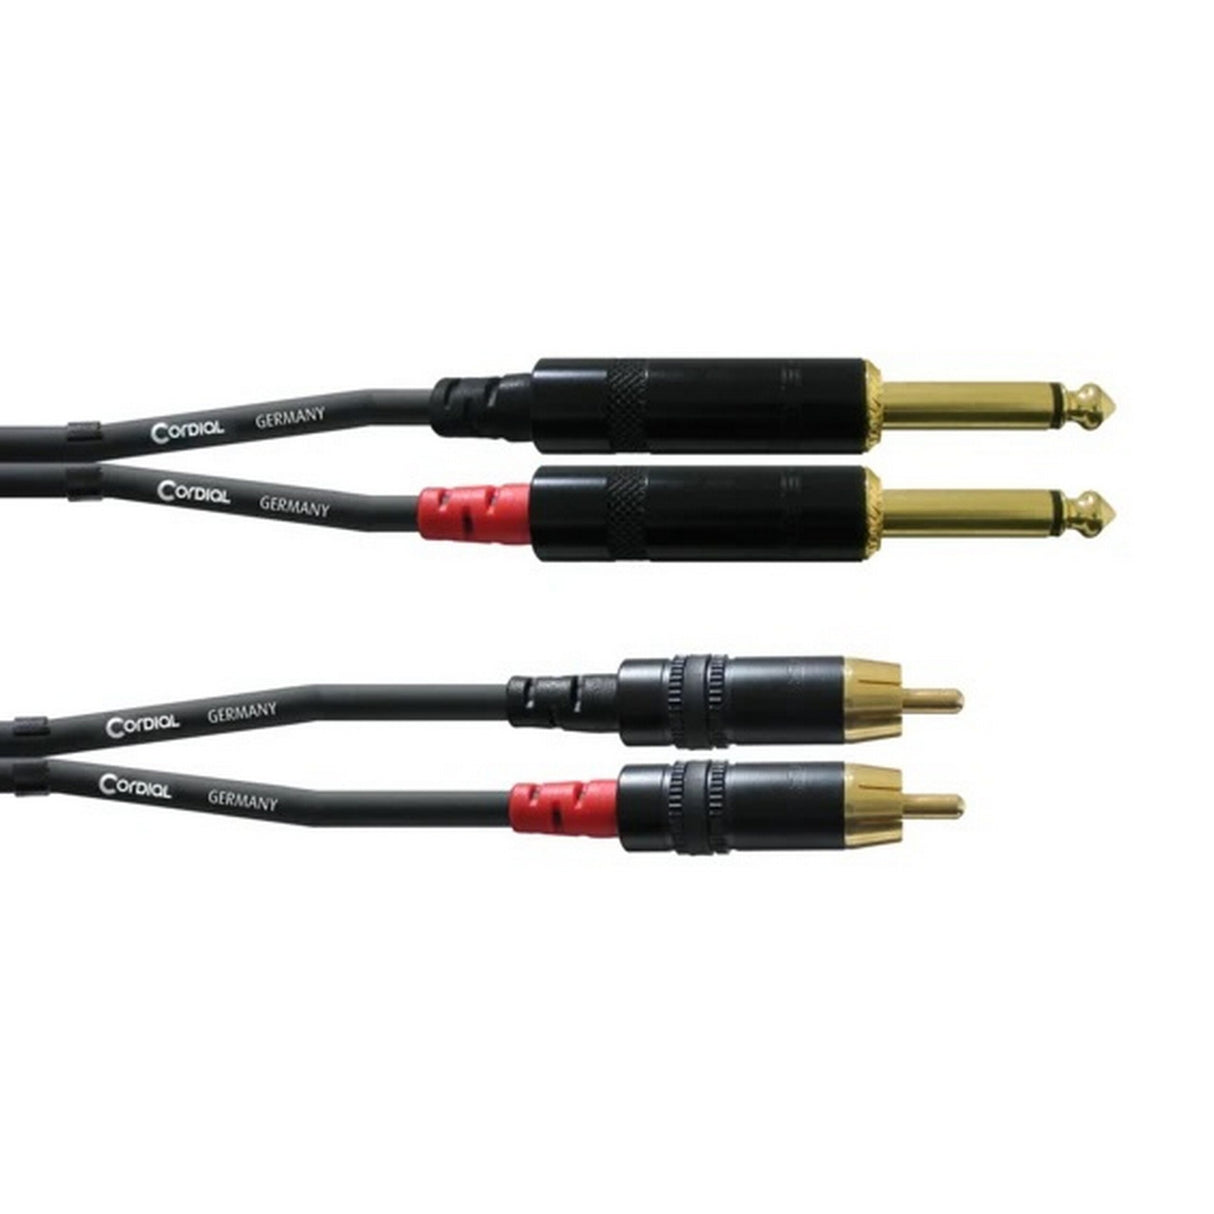 Cordial CFU 1.5 PC 2 x 1/4-Inch to 2 x RCA Twin Cable/Adapter, Black, 5-Feet